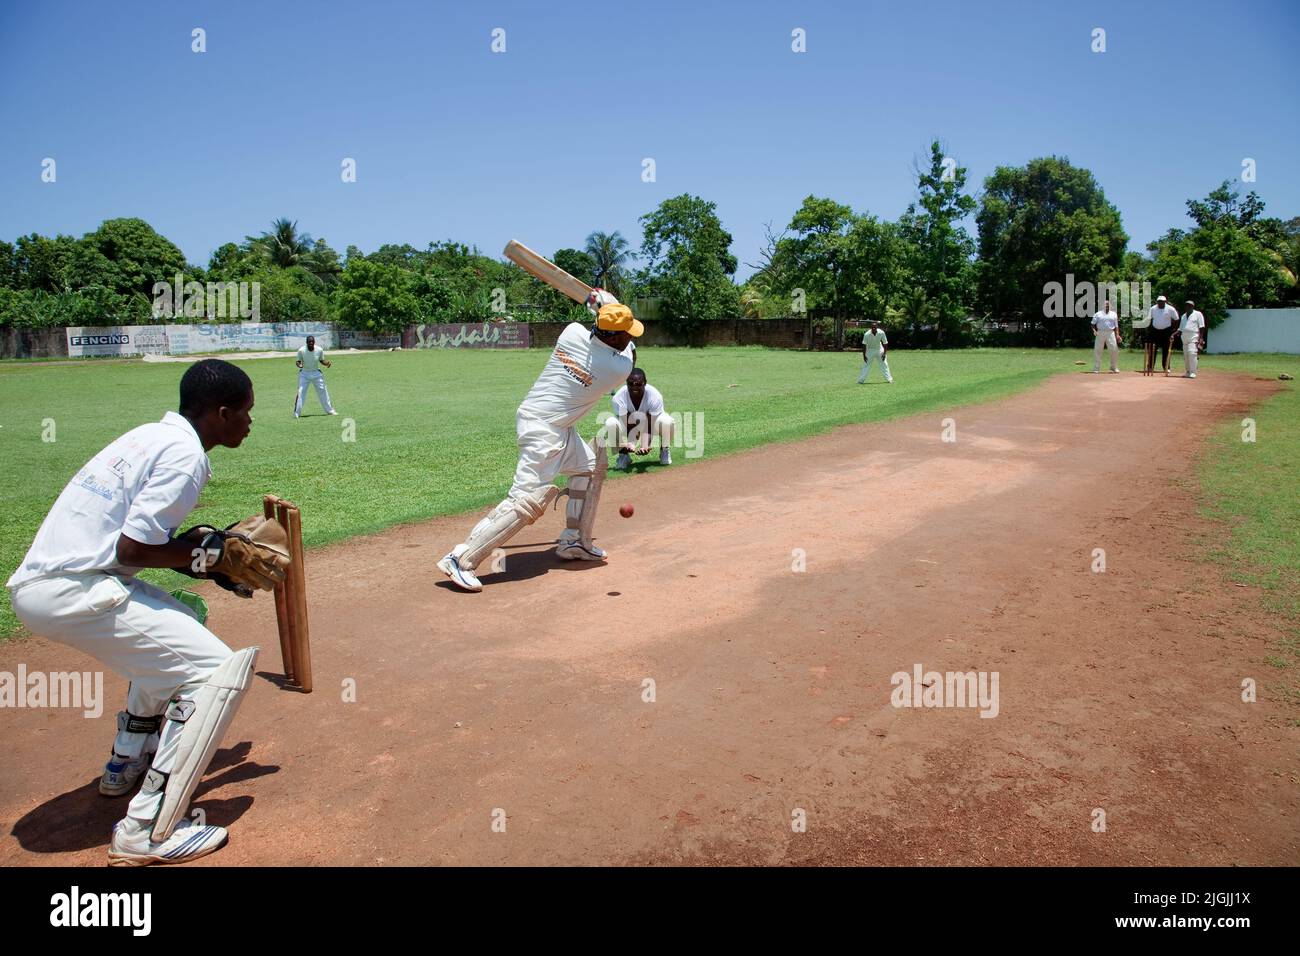 Jamaica, Ocho Rios, although soccer is getting more populair, cricket is still the nr.1 sport in the country. Stock Photo